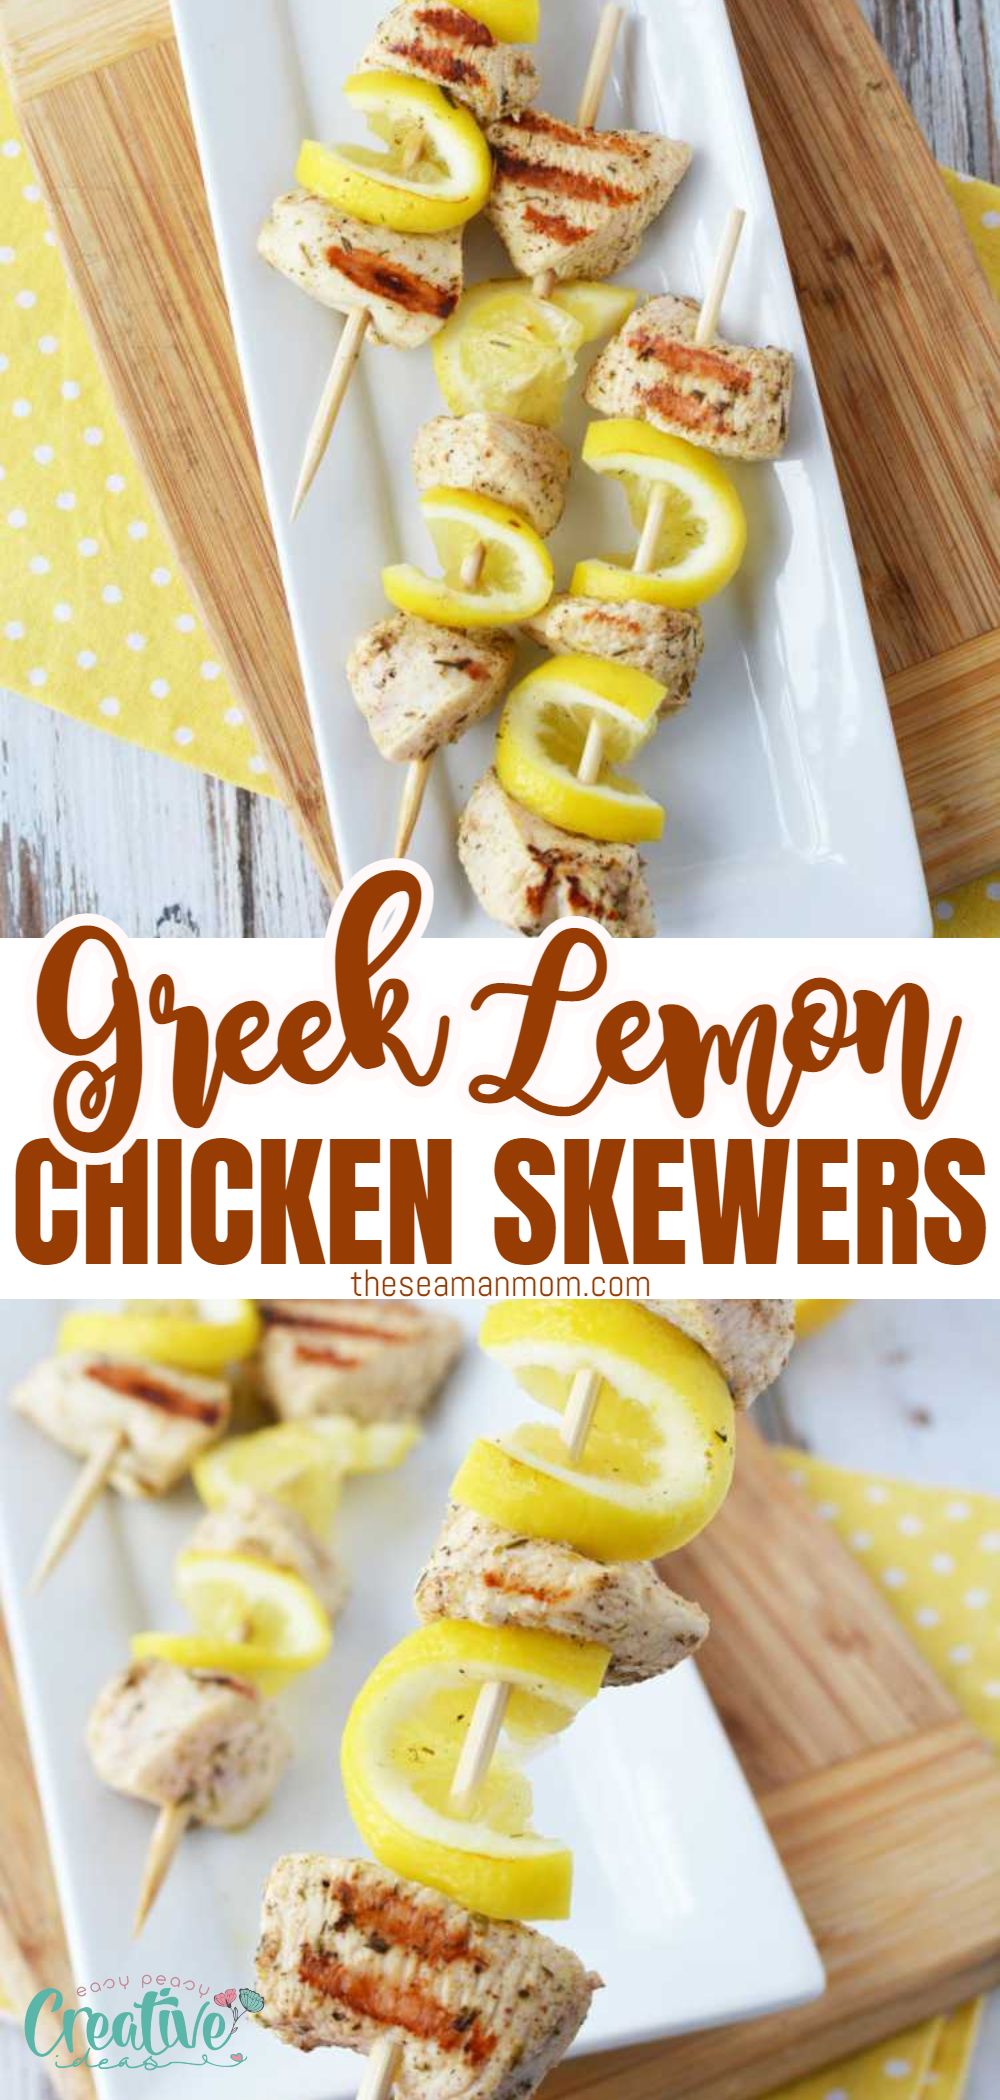 Is there anything better than grilled meat on a stick? These lemon chicken skewers are marinated in Greek seasoning for the yummiest, most tender Greek kabobs ever! via @petroneagu